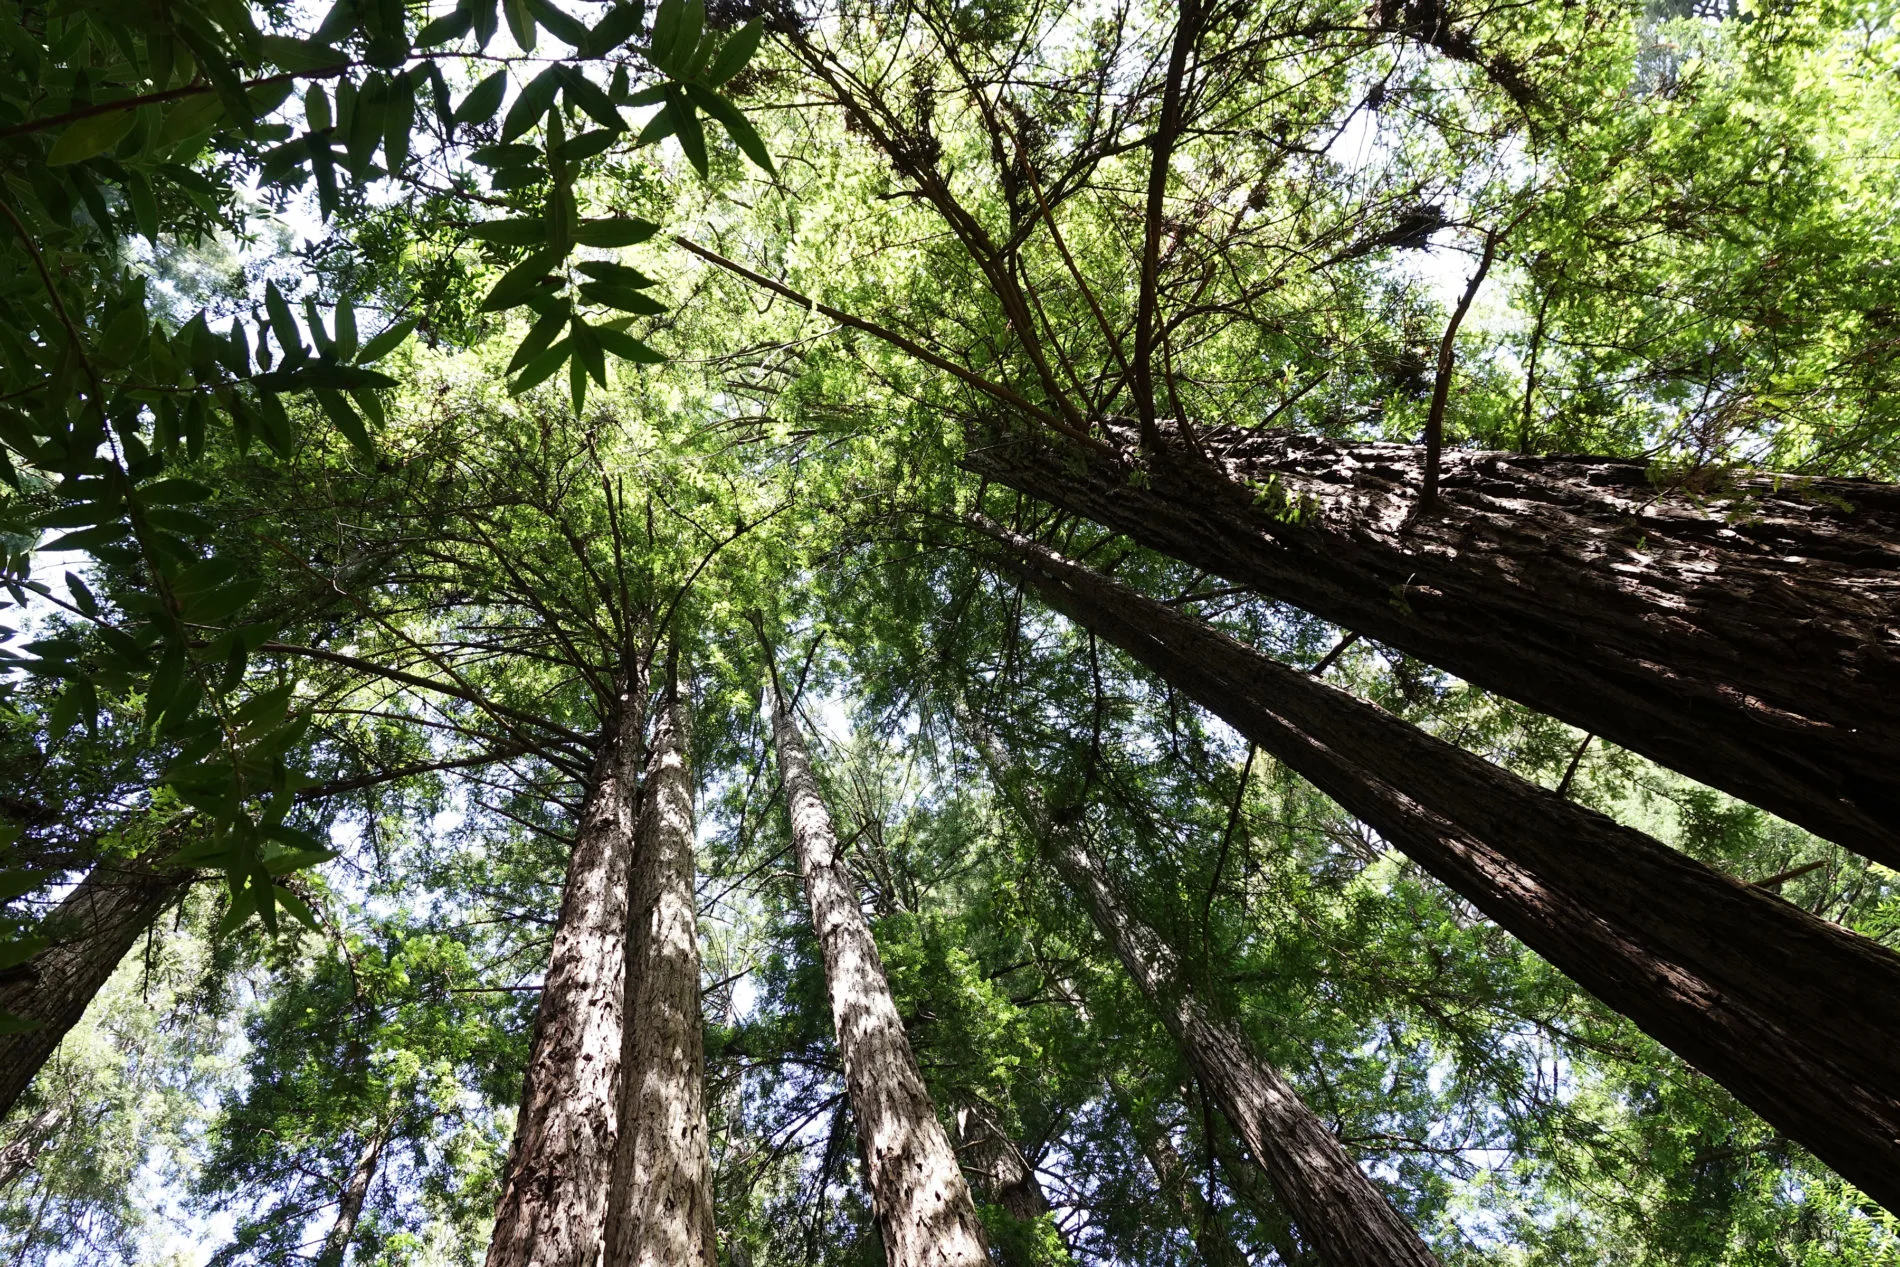 Looking up at the forest canopy at Muir Woods National Monument.